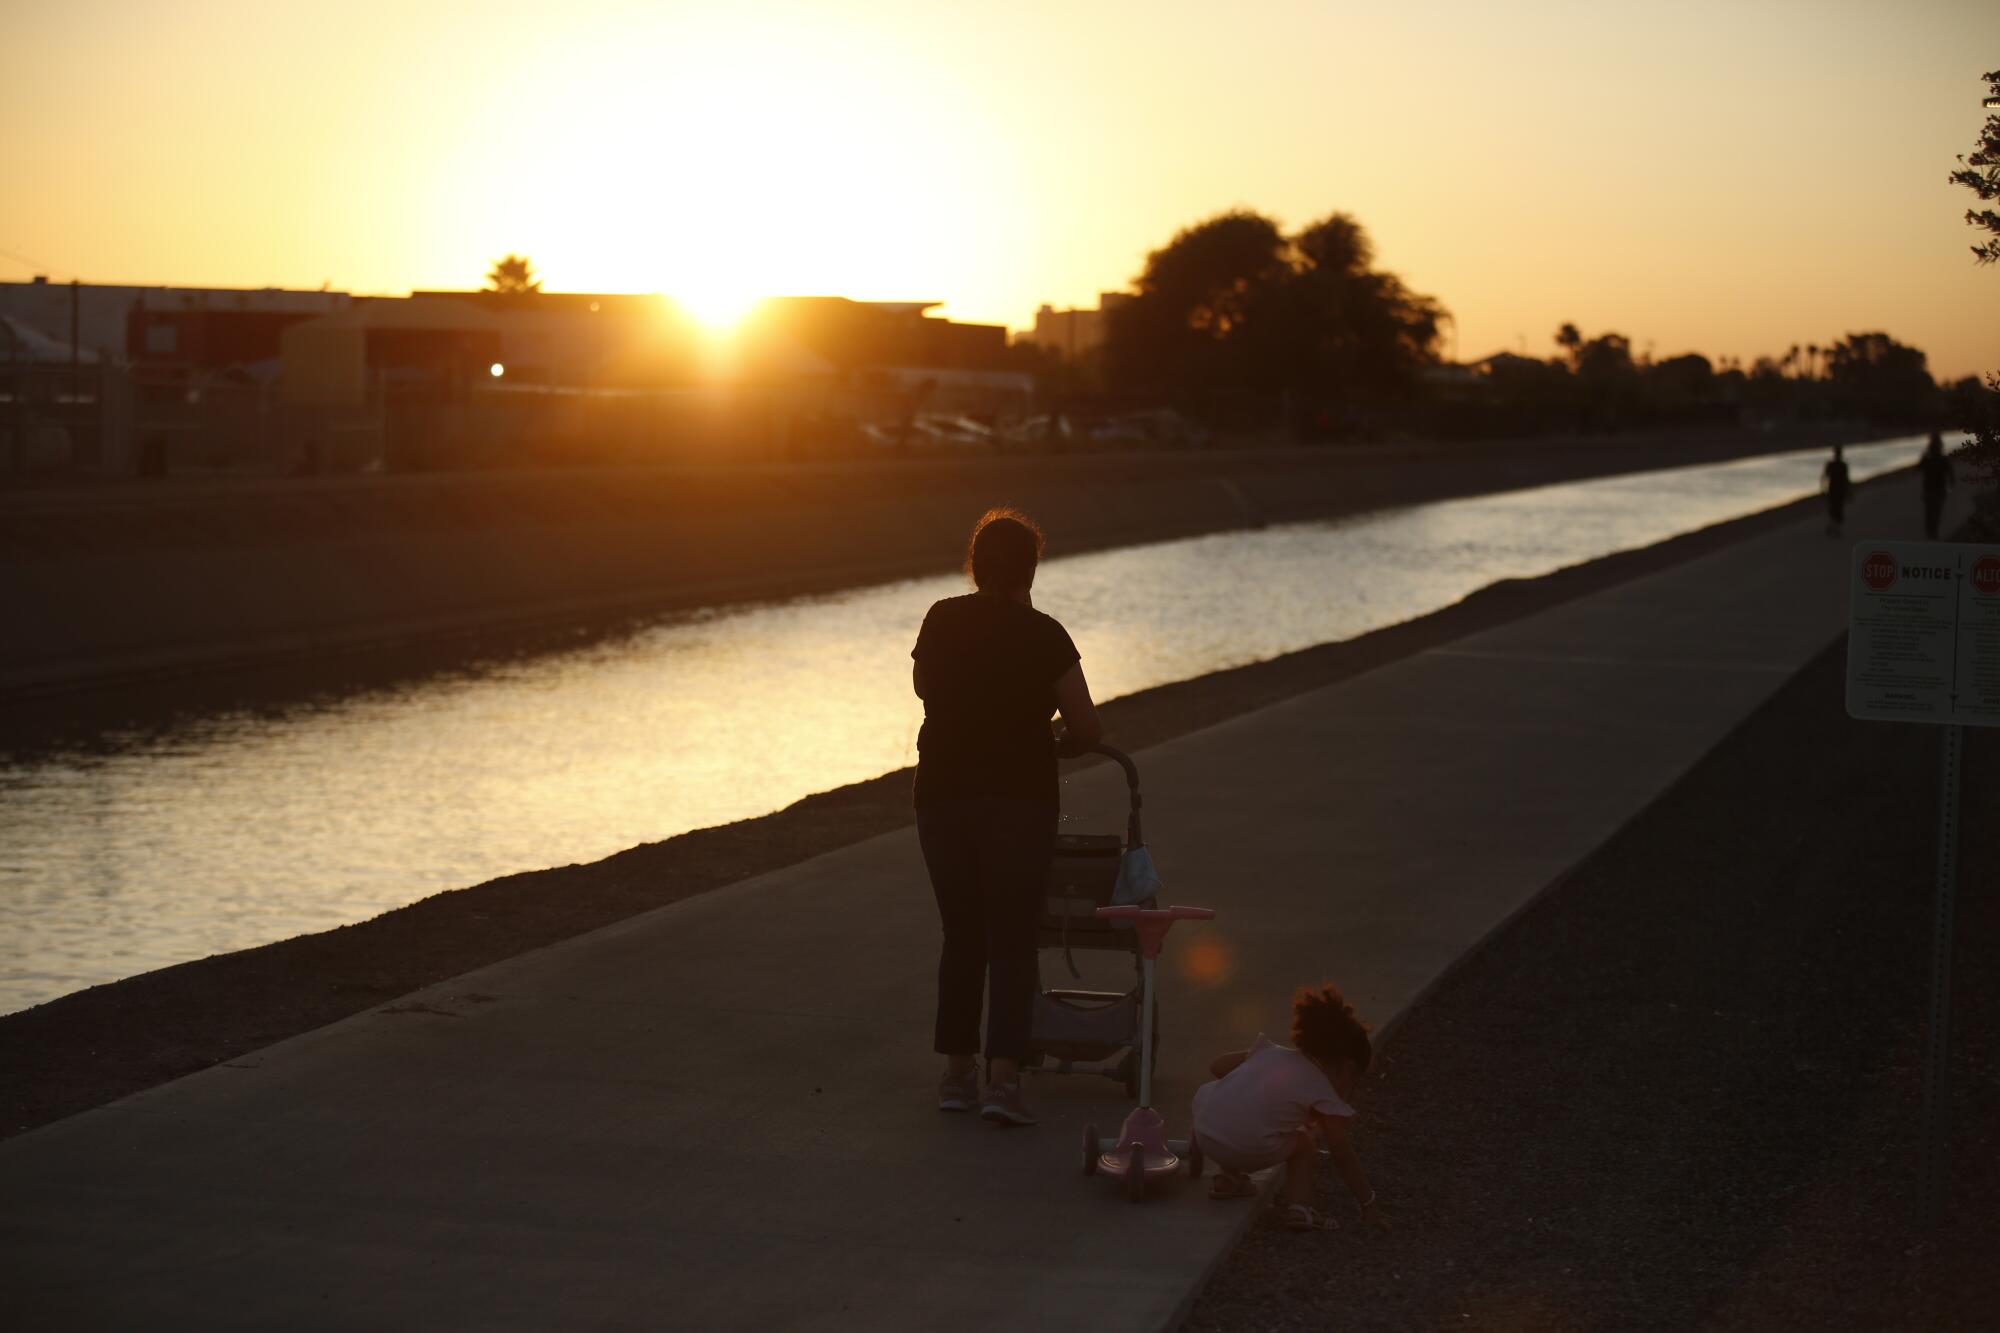 A toddler squatting and reaching for something off the path as she follows a woman walking along a waterway at sunset